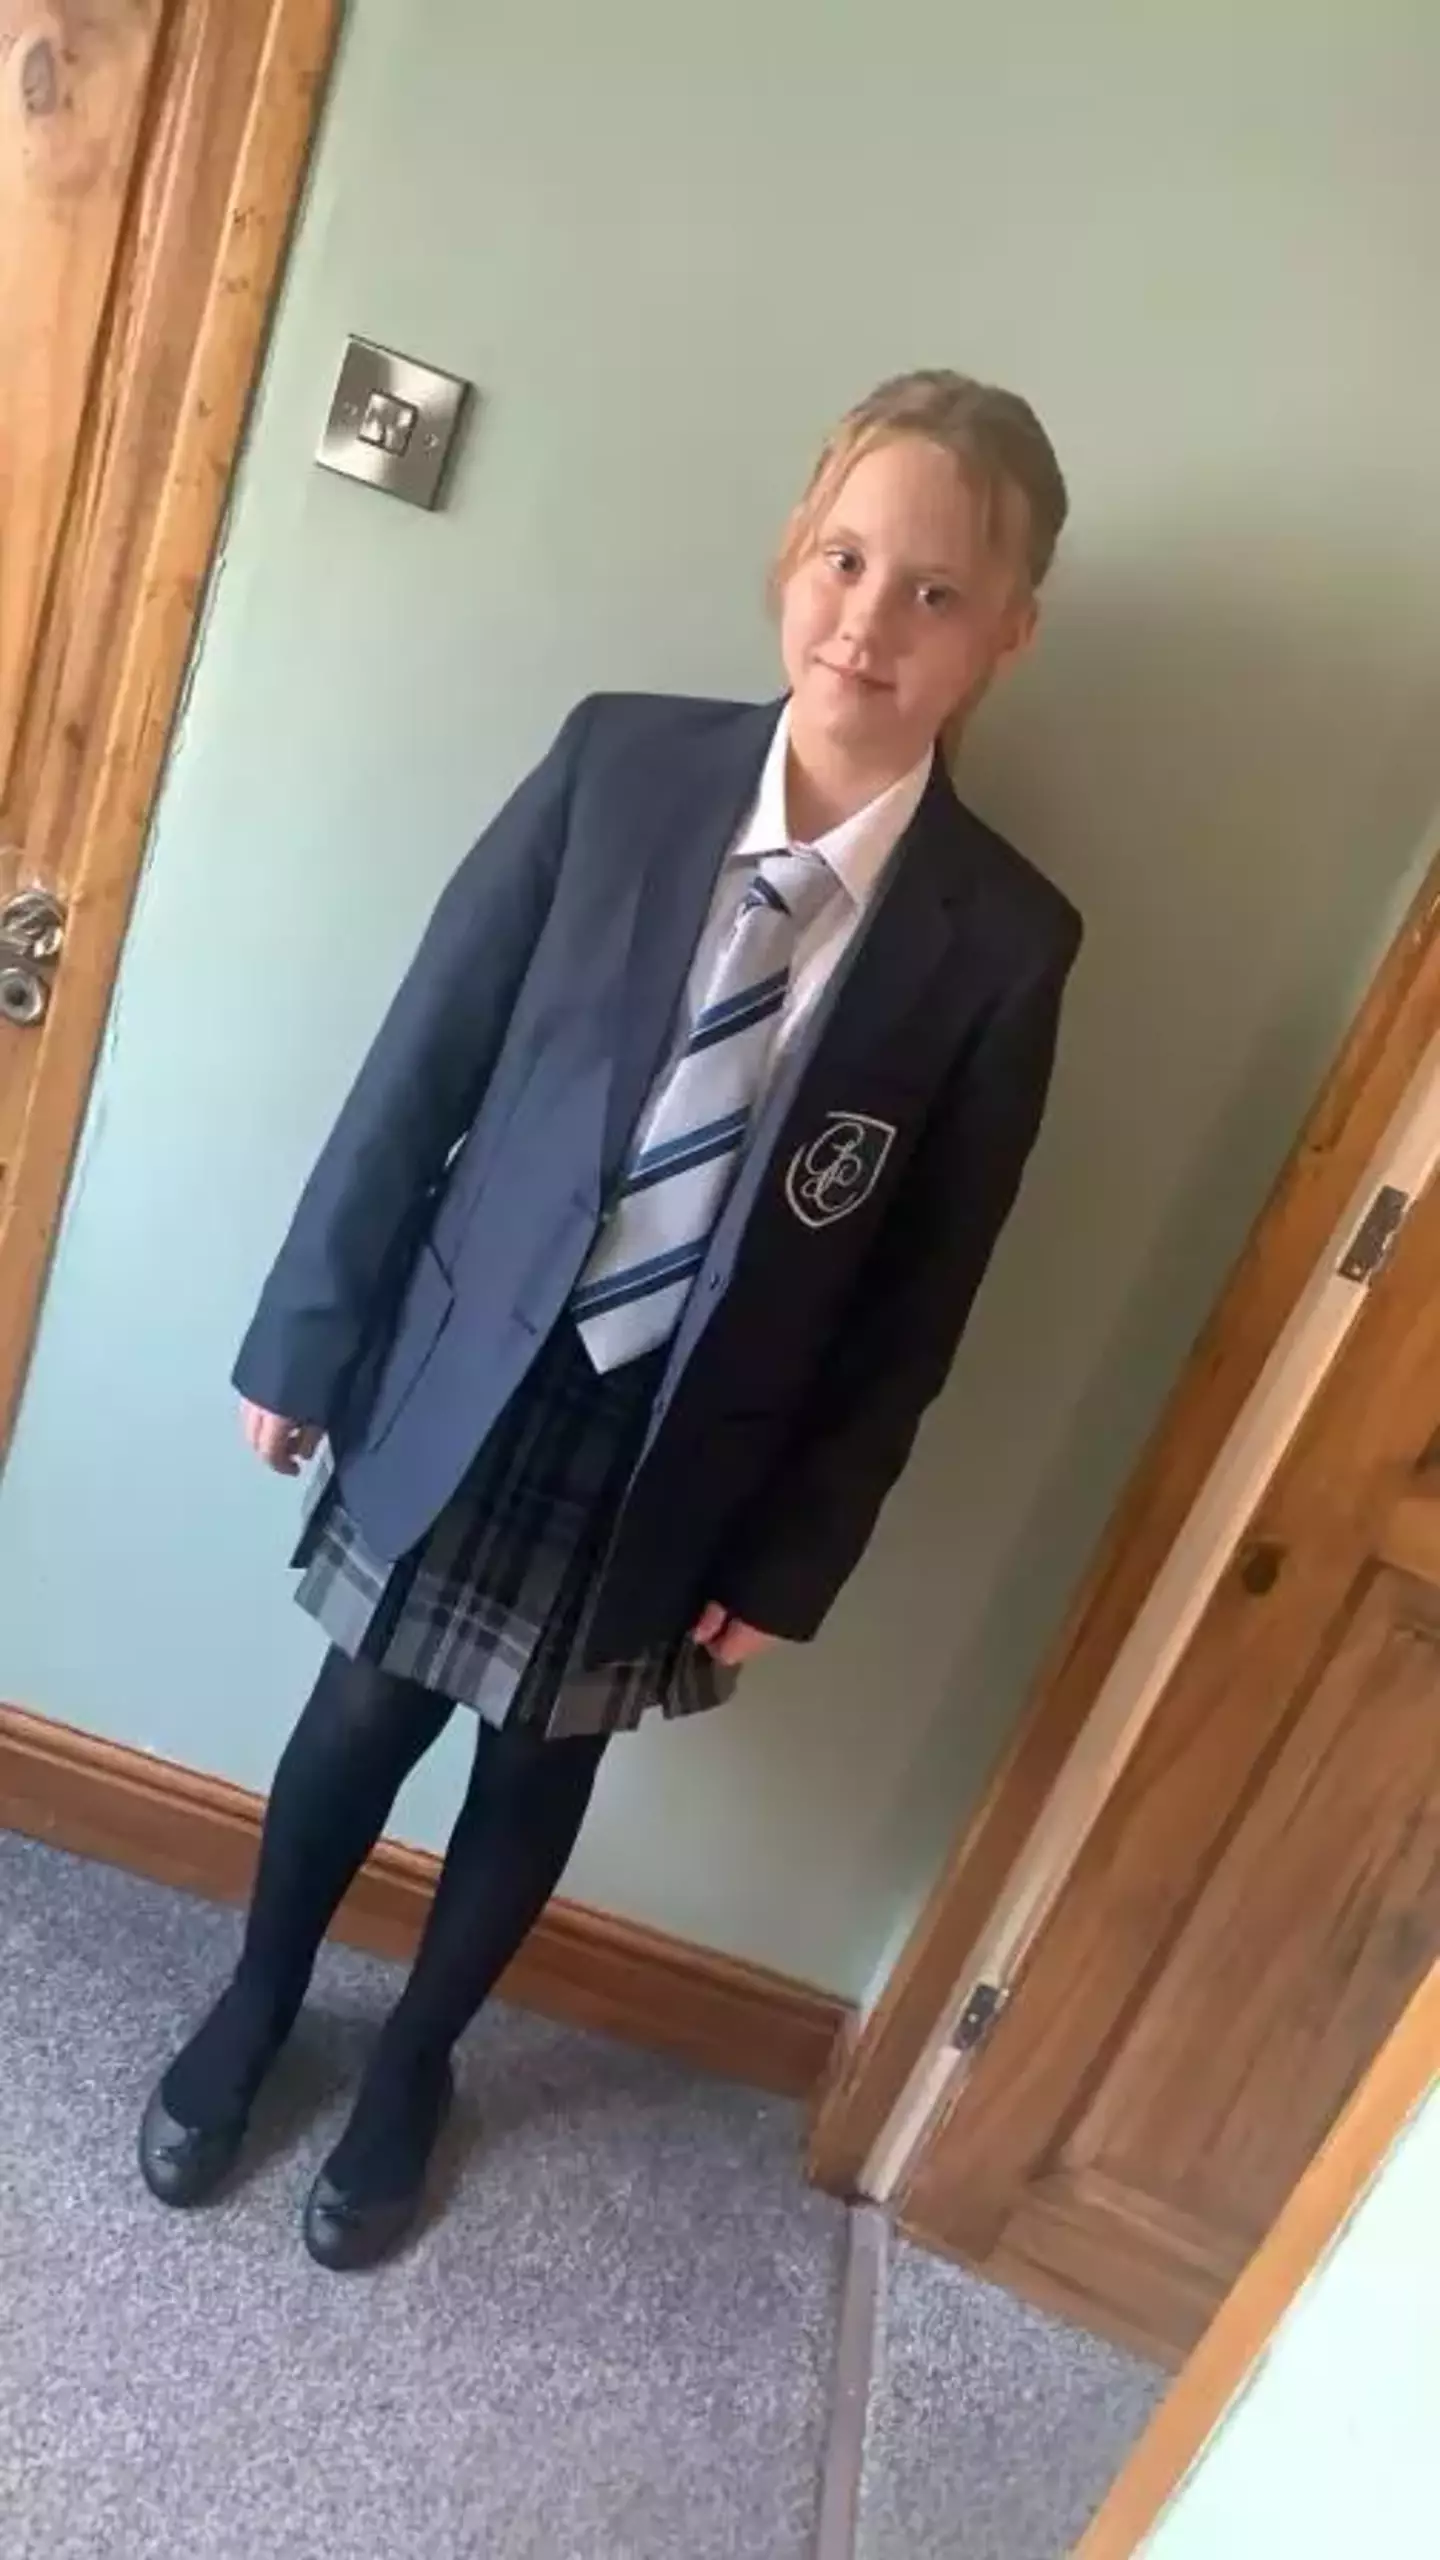 11-year-old Layla Thomson was sent home from her first day of high school.